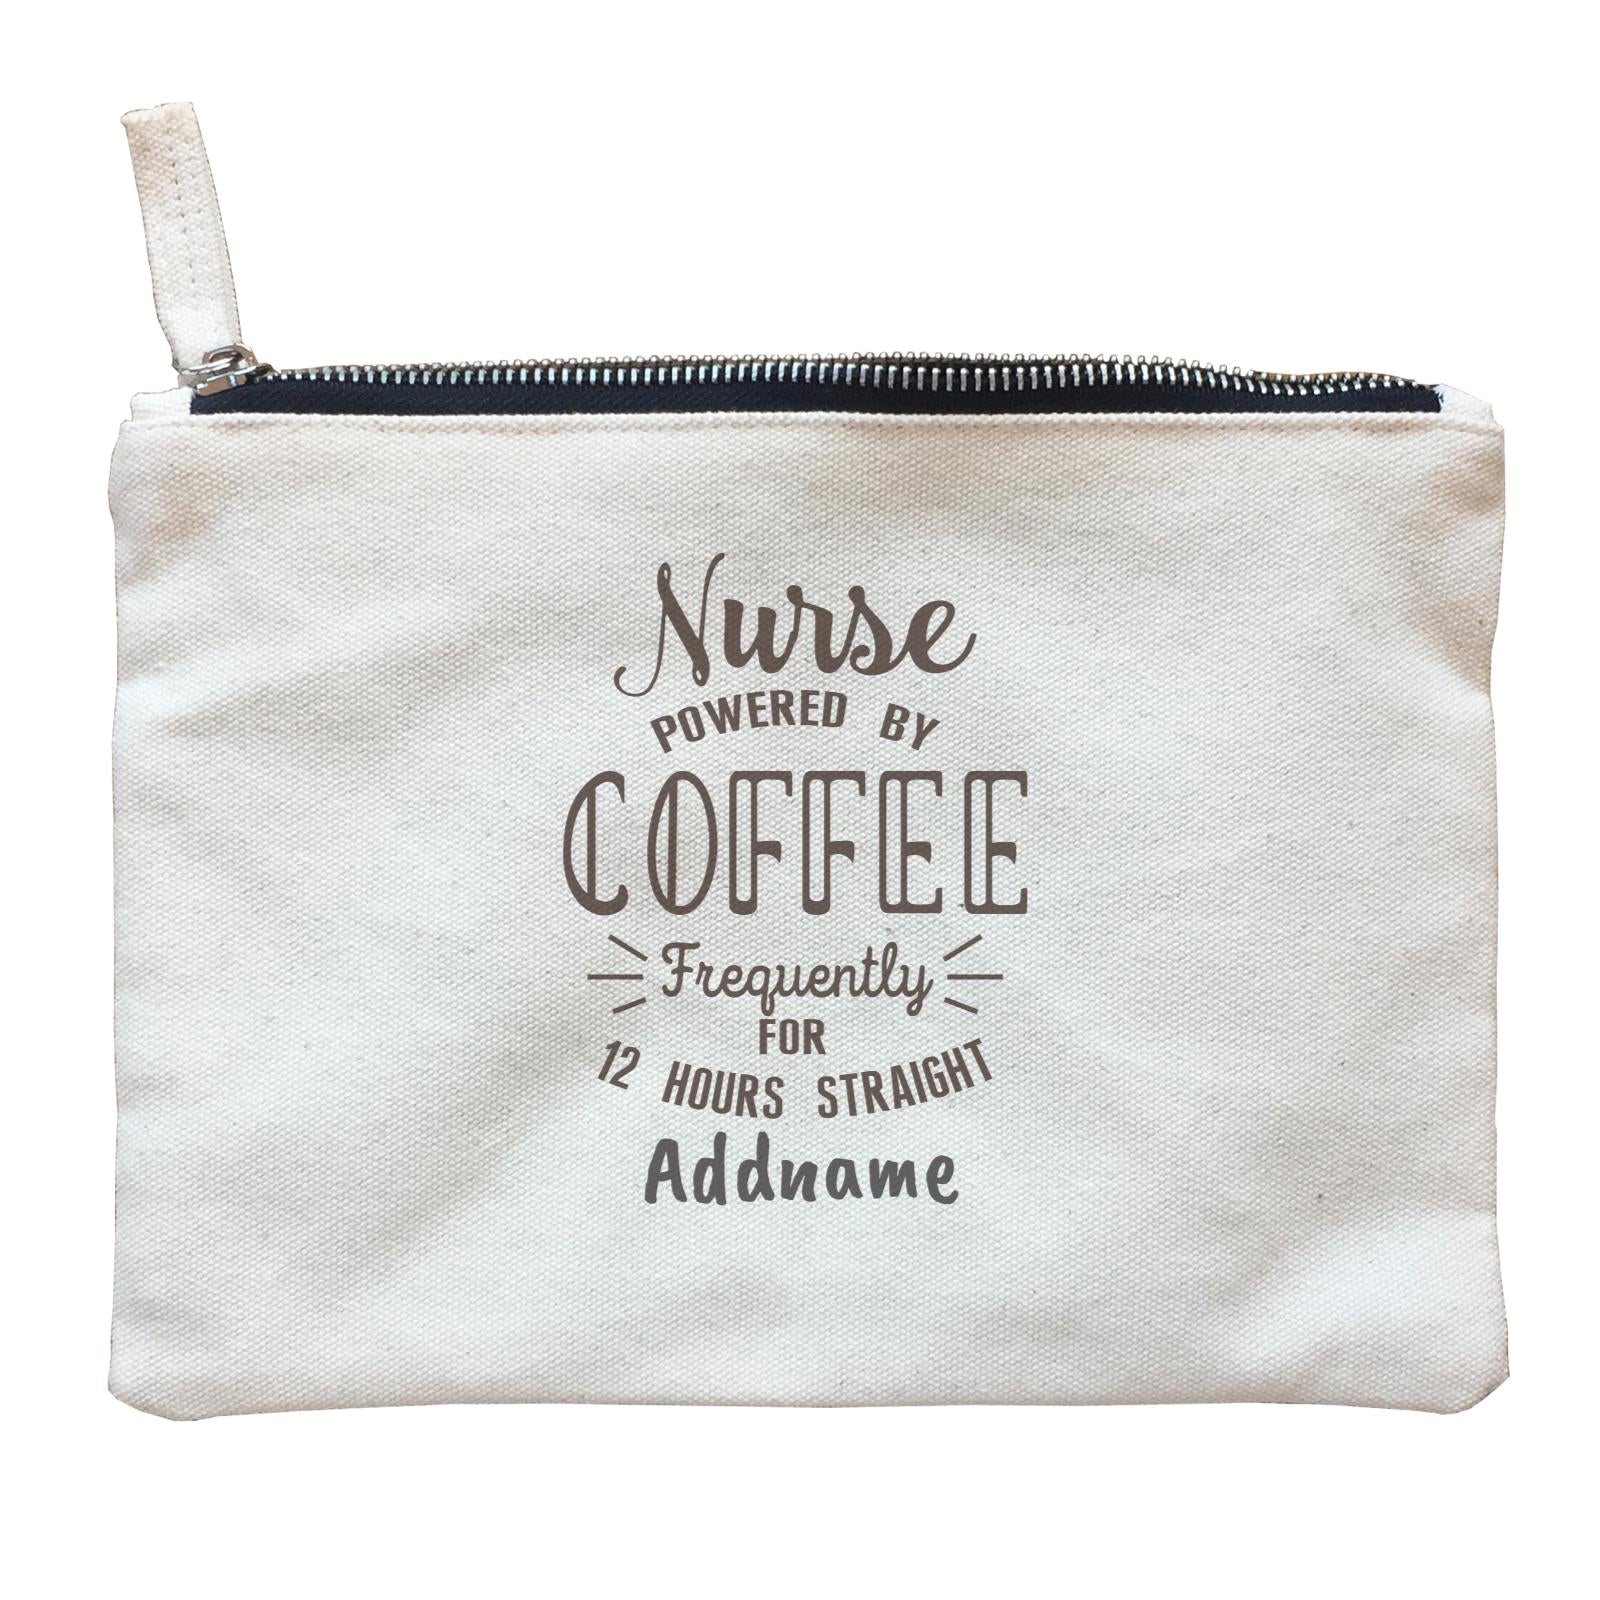 Nurse Powered By Coffee Frequently for 12 Hours Straight Zipper Pouch